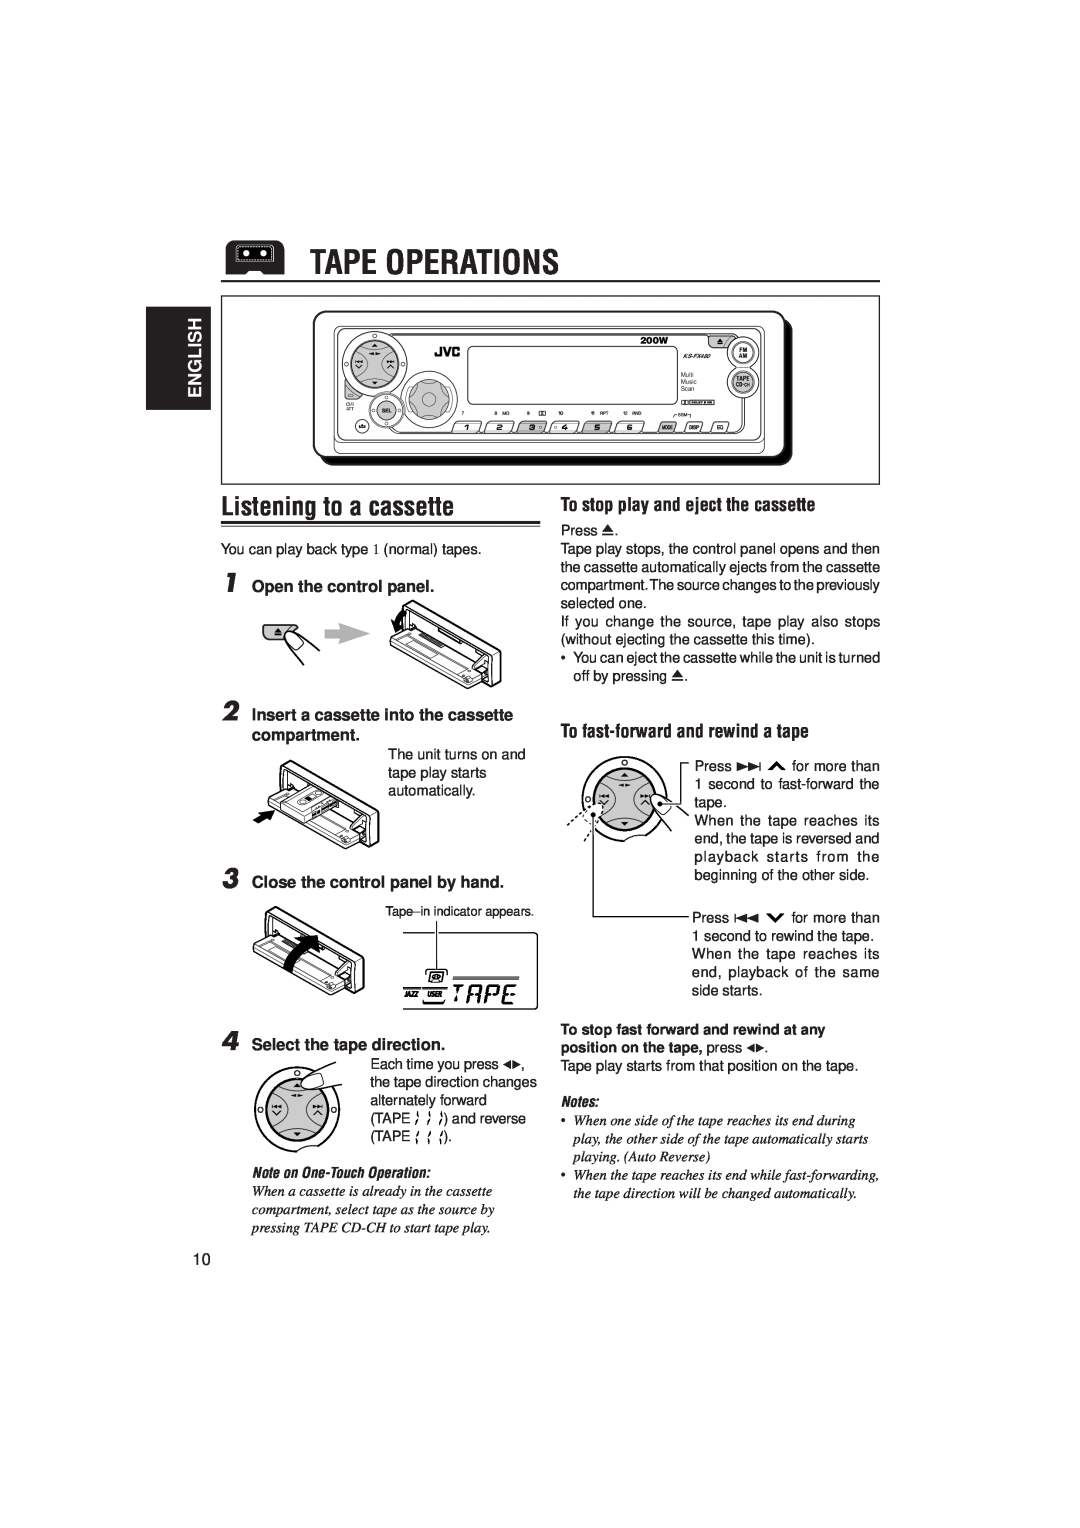 JVC KS-FX480J manual Tape Operations, Listening to a cassette, To stop play and eject the cassette, English 